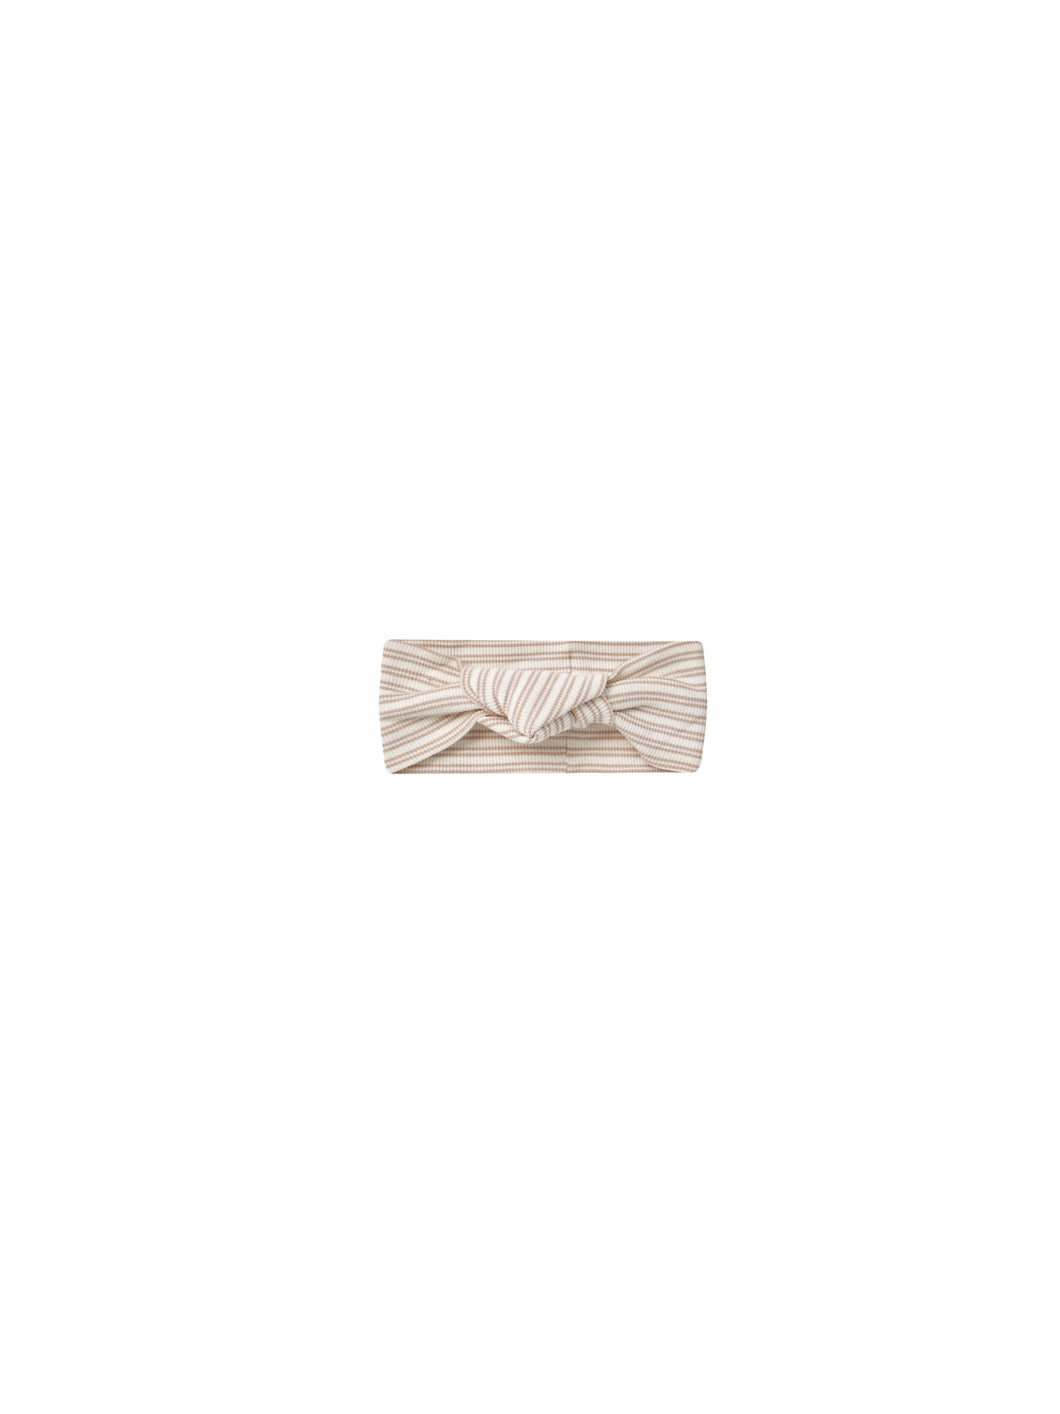 Oat Stripe Ribbed Knotted Headband